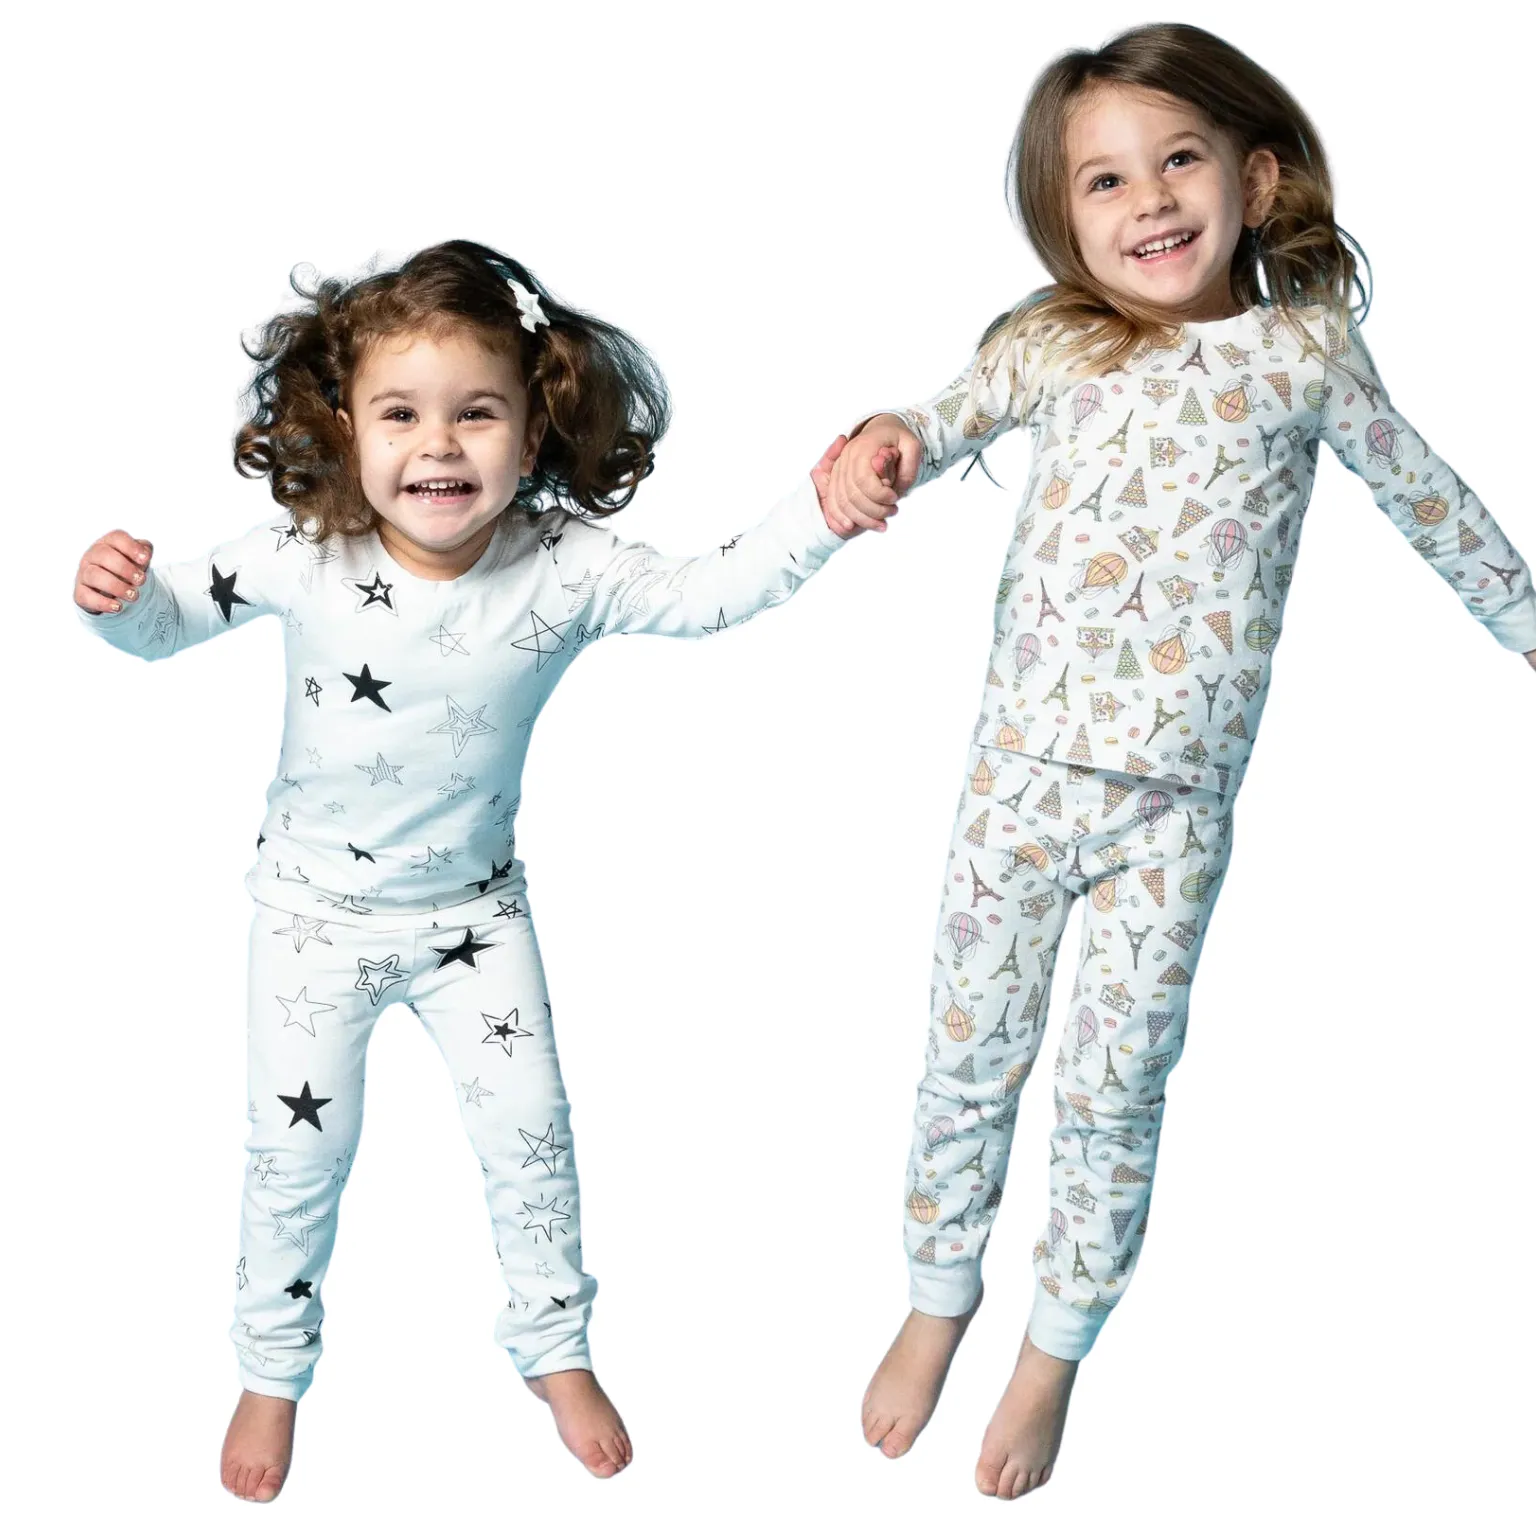 Graphic Pajamas manufacturing with trendy design